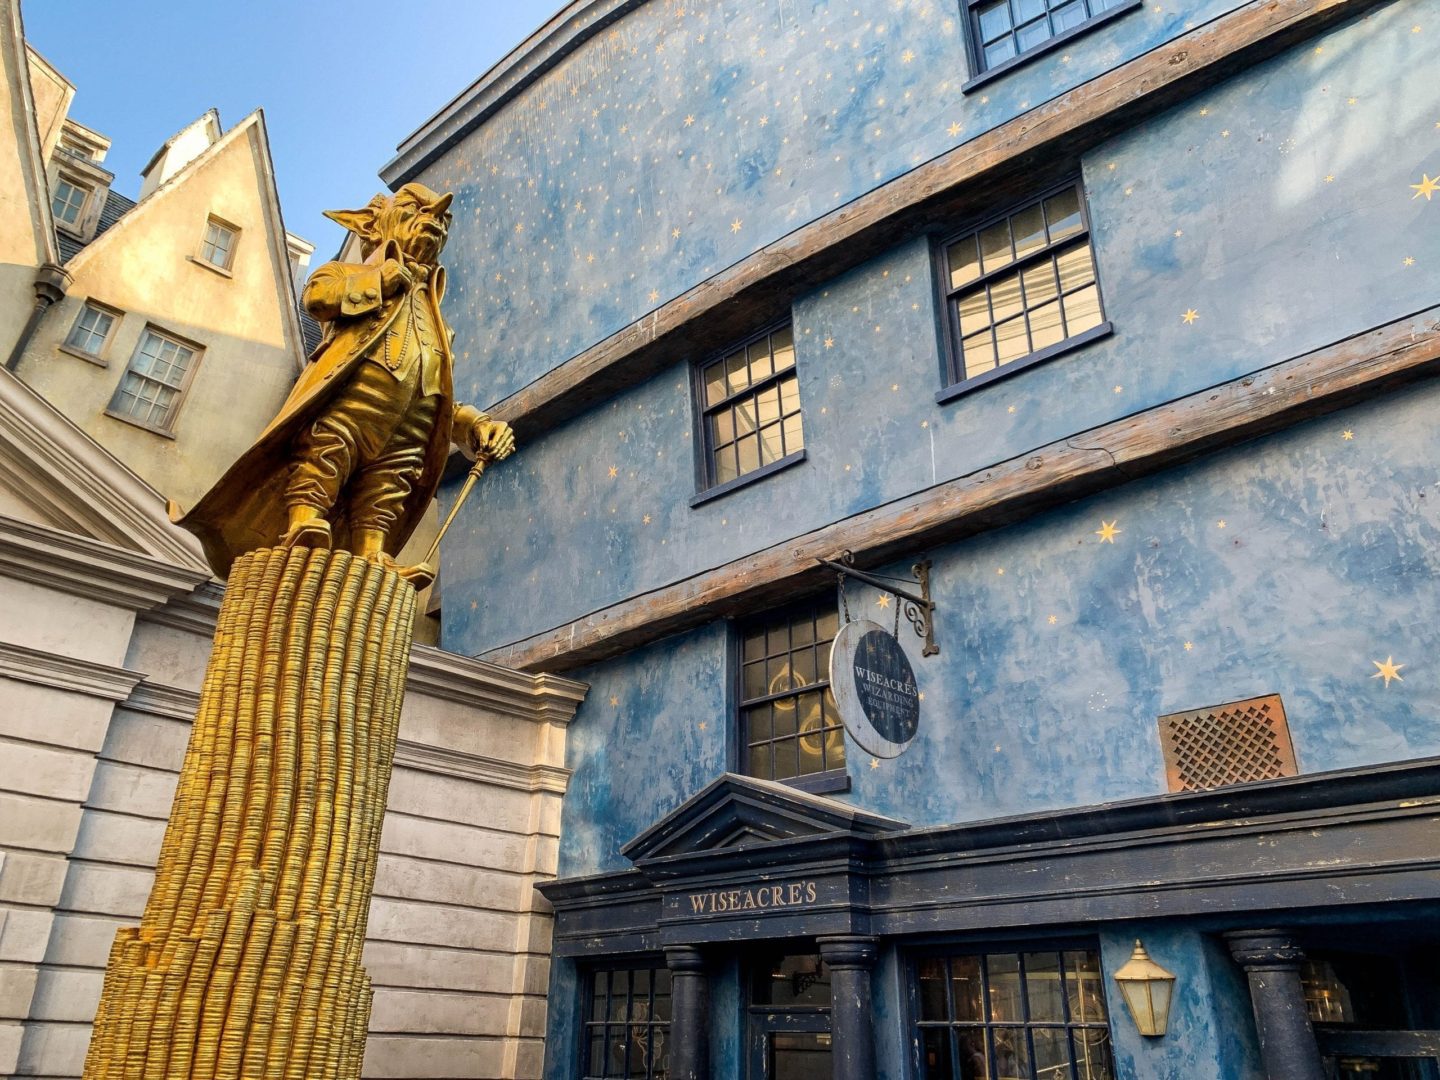 Universal Studios Diagon Alley, the Wizarding World of Harry Potter